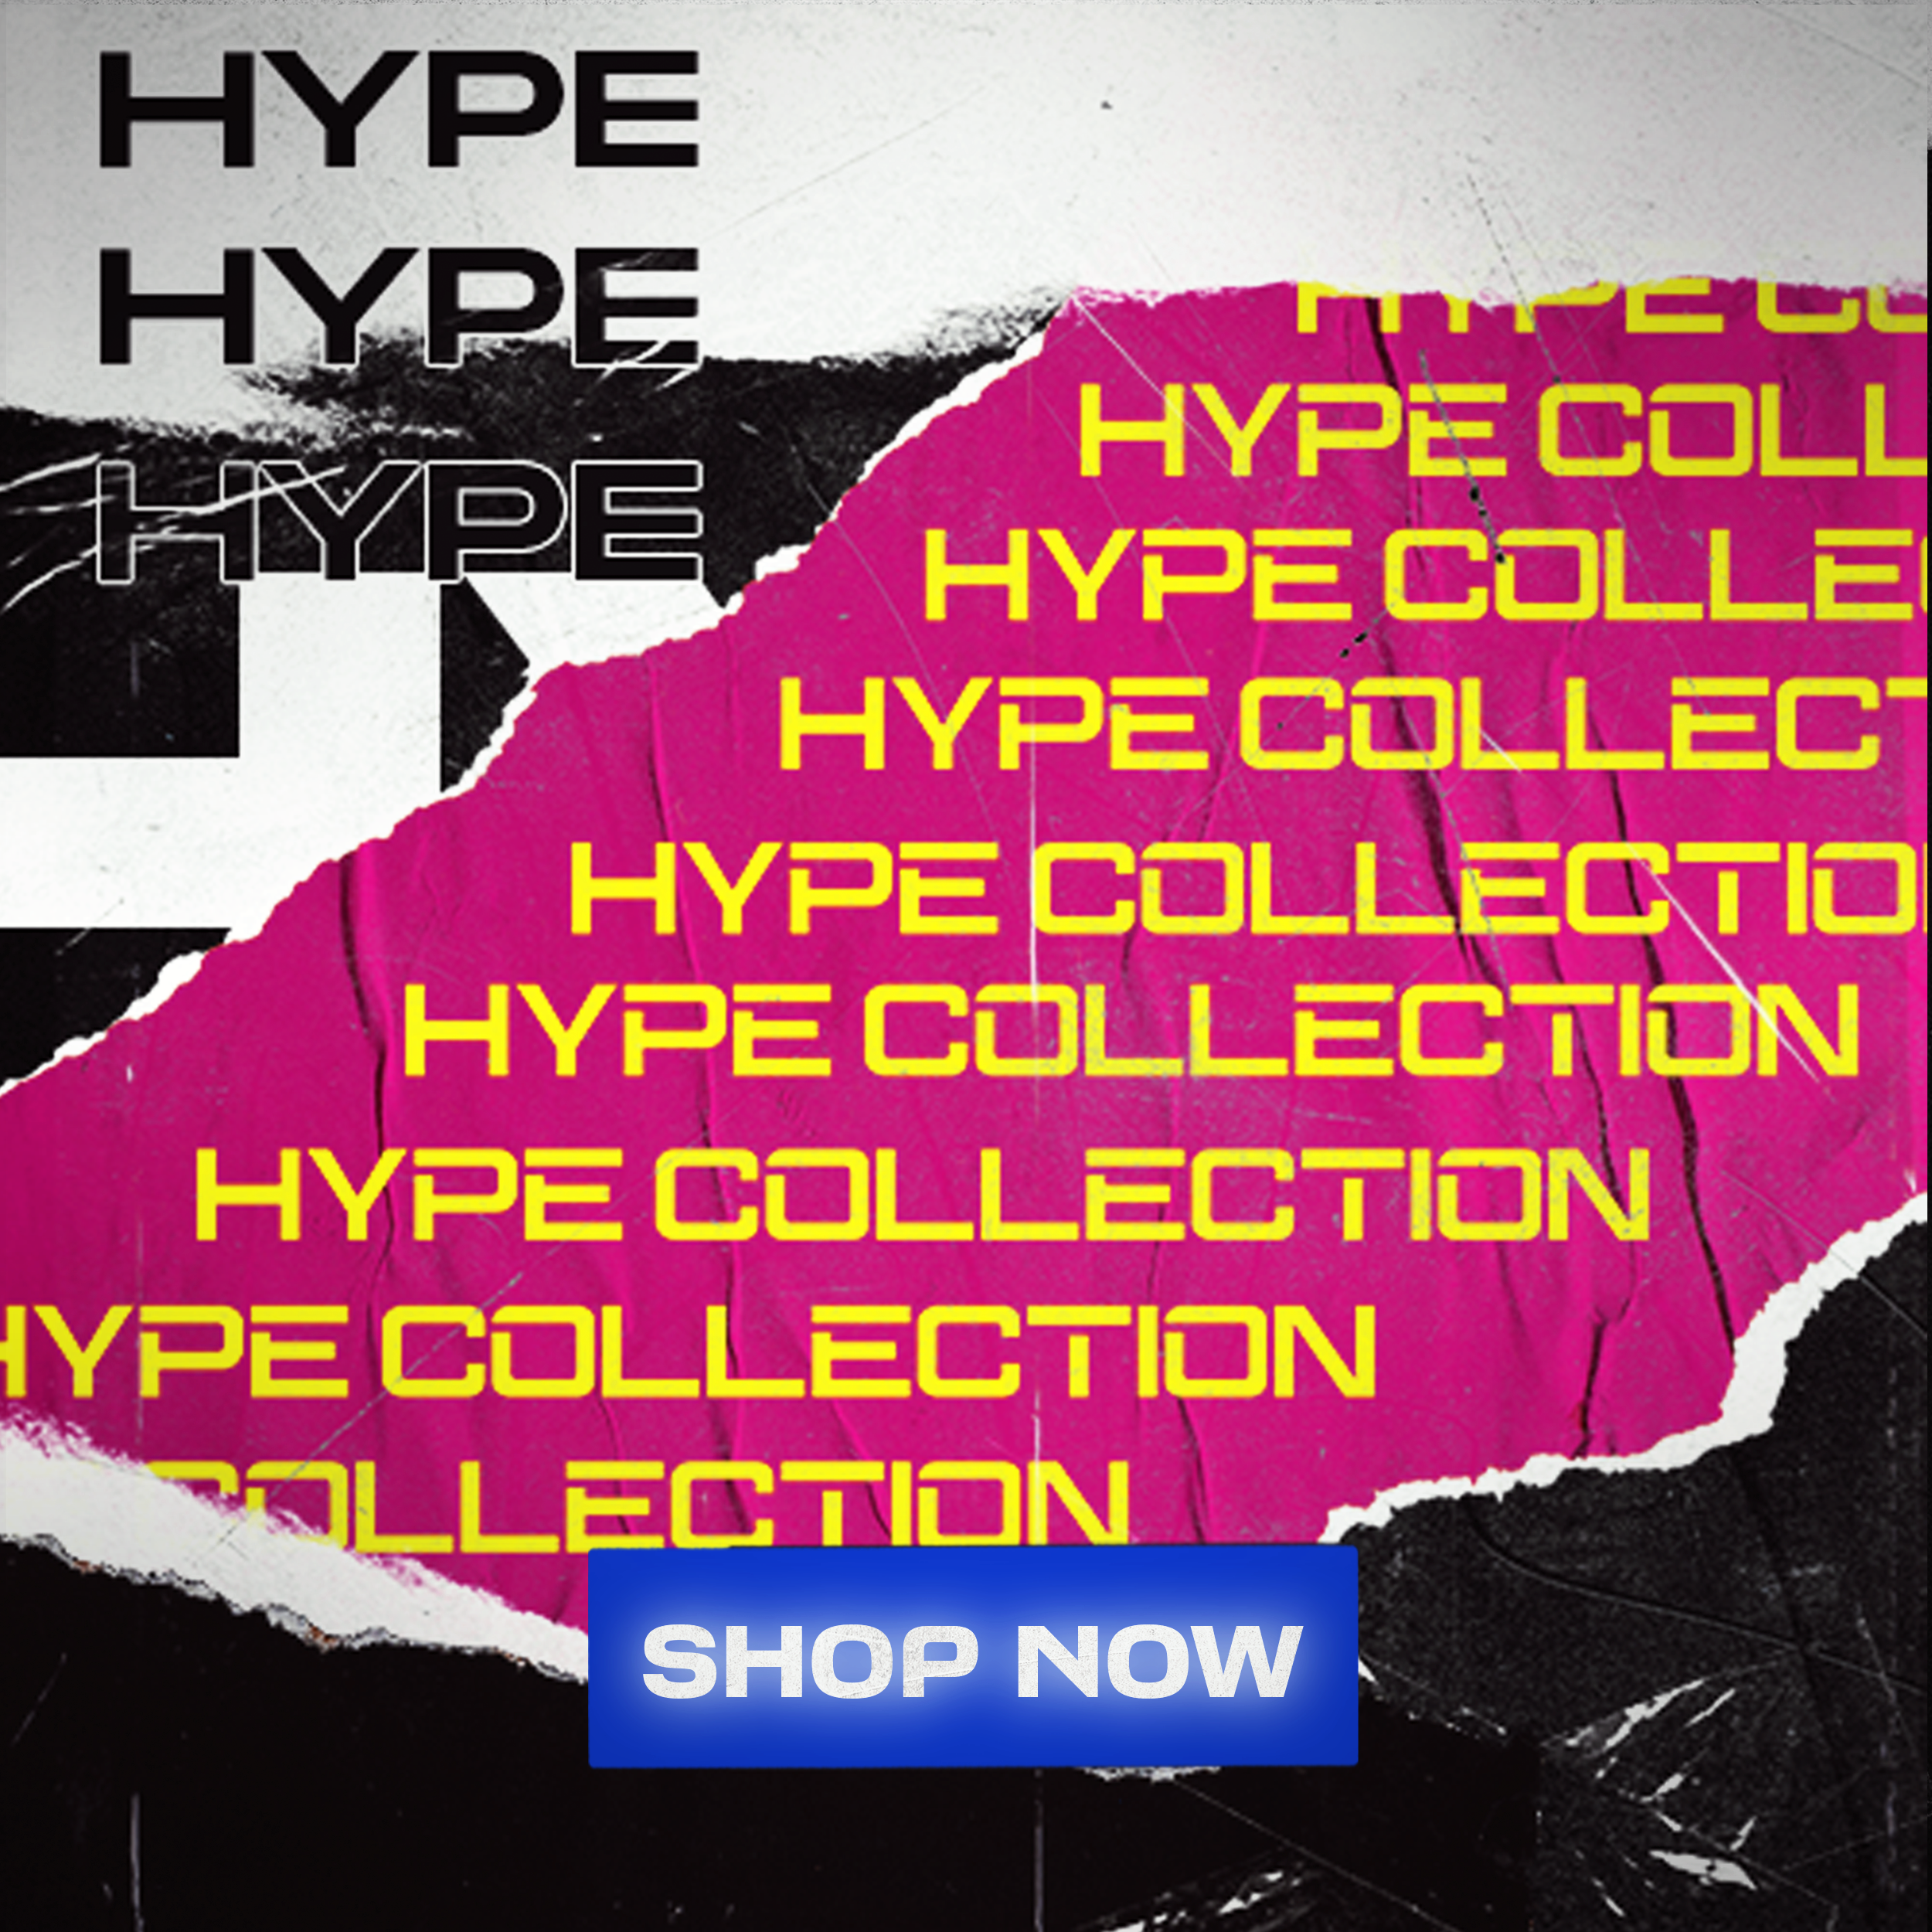 The HYPE COLLECTION